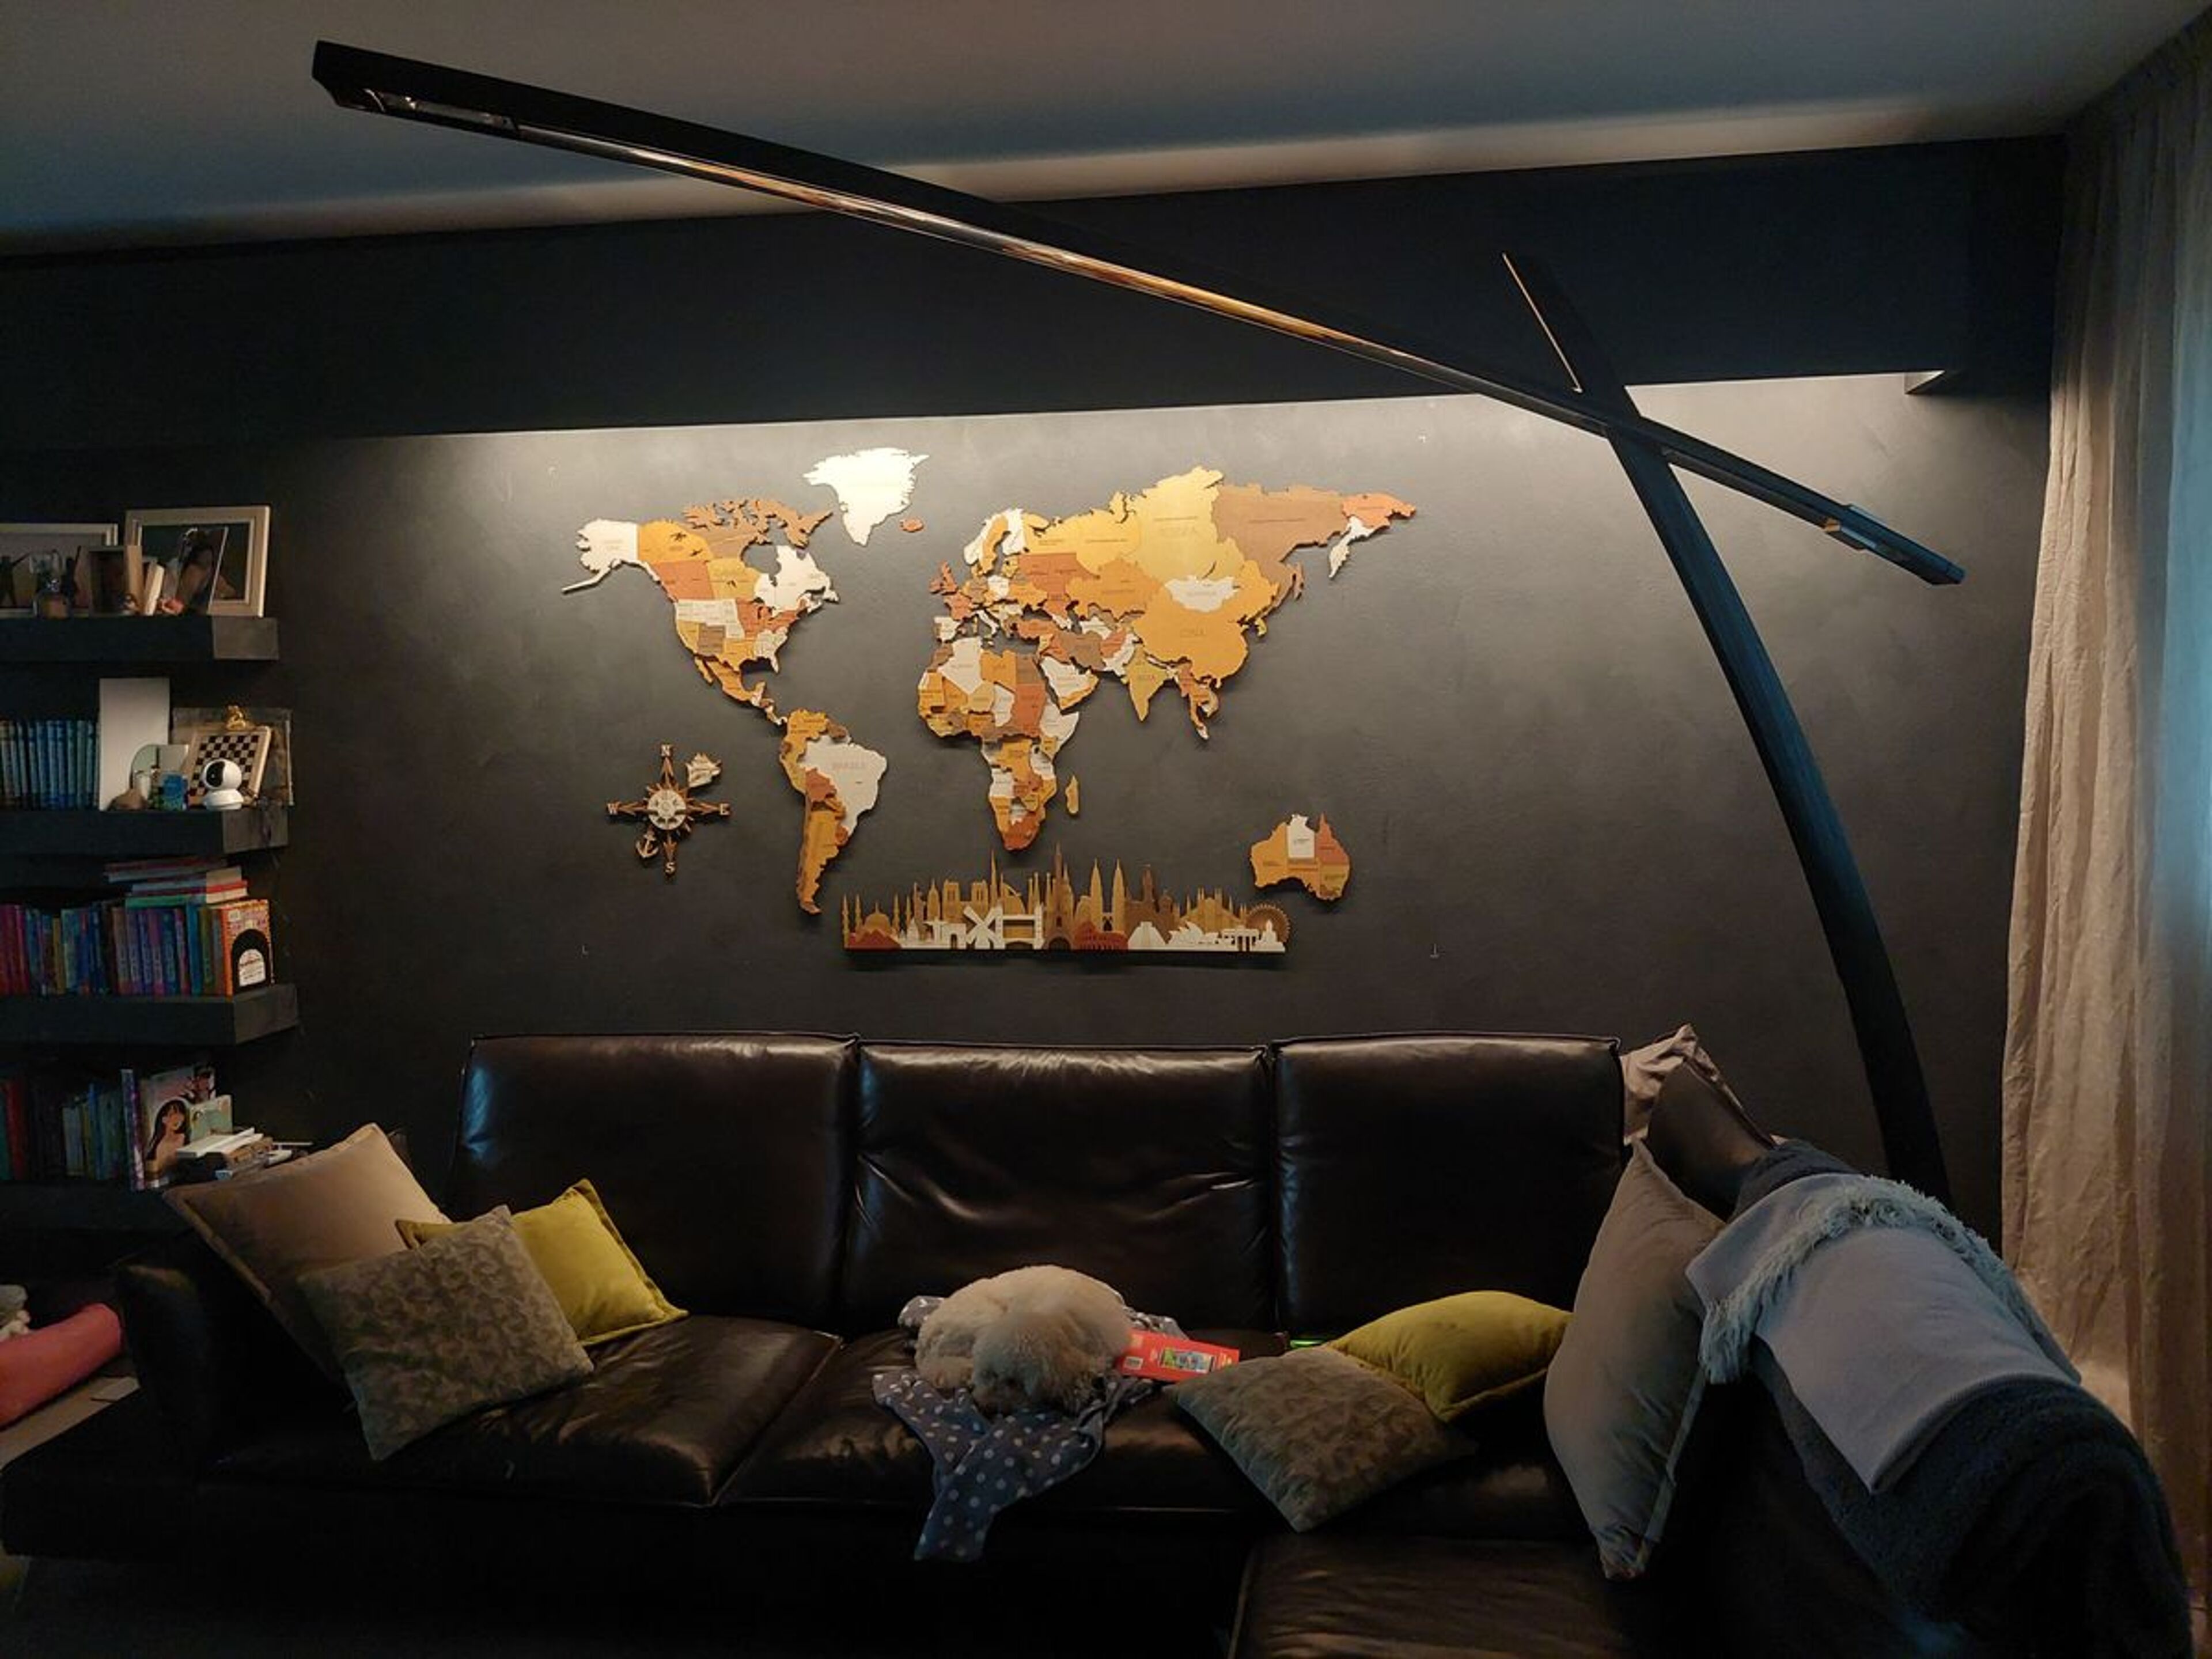 Review for Wooden World Map Wall Decoration - image from Stefano Pieri